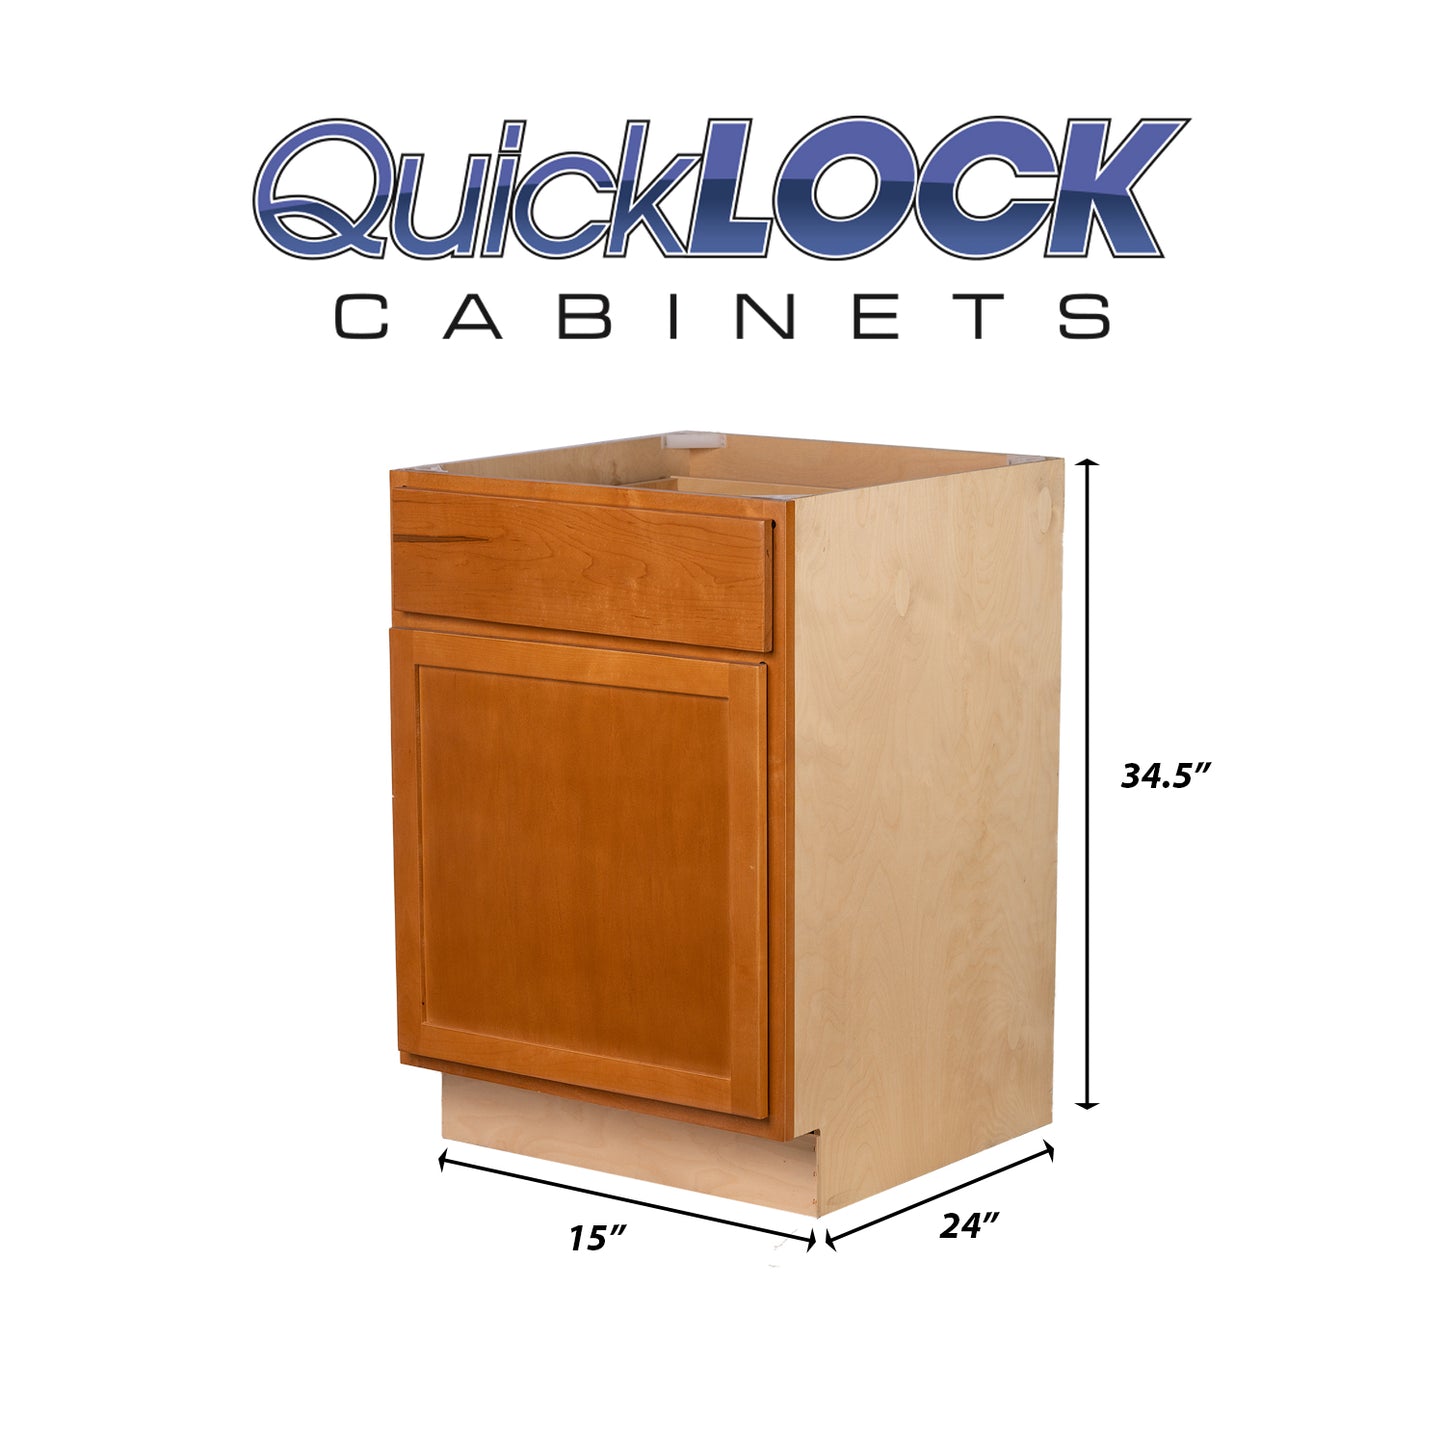 Quicklock RTA (Ready-to-Assemble) Provincial Stain Base Cabinet | 15"Wx34.5"Hx24"D